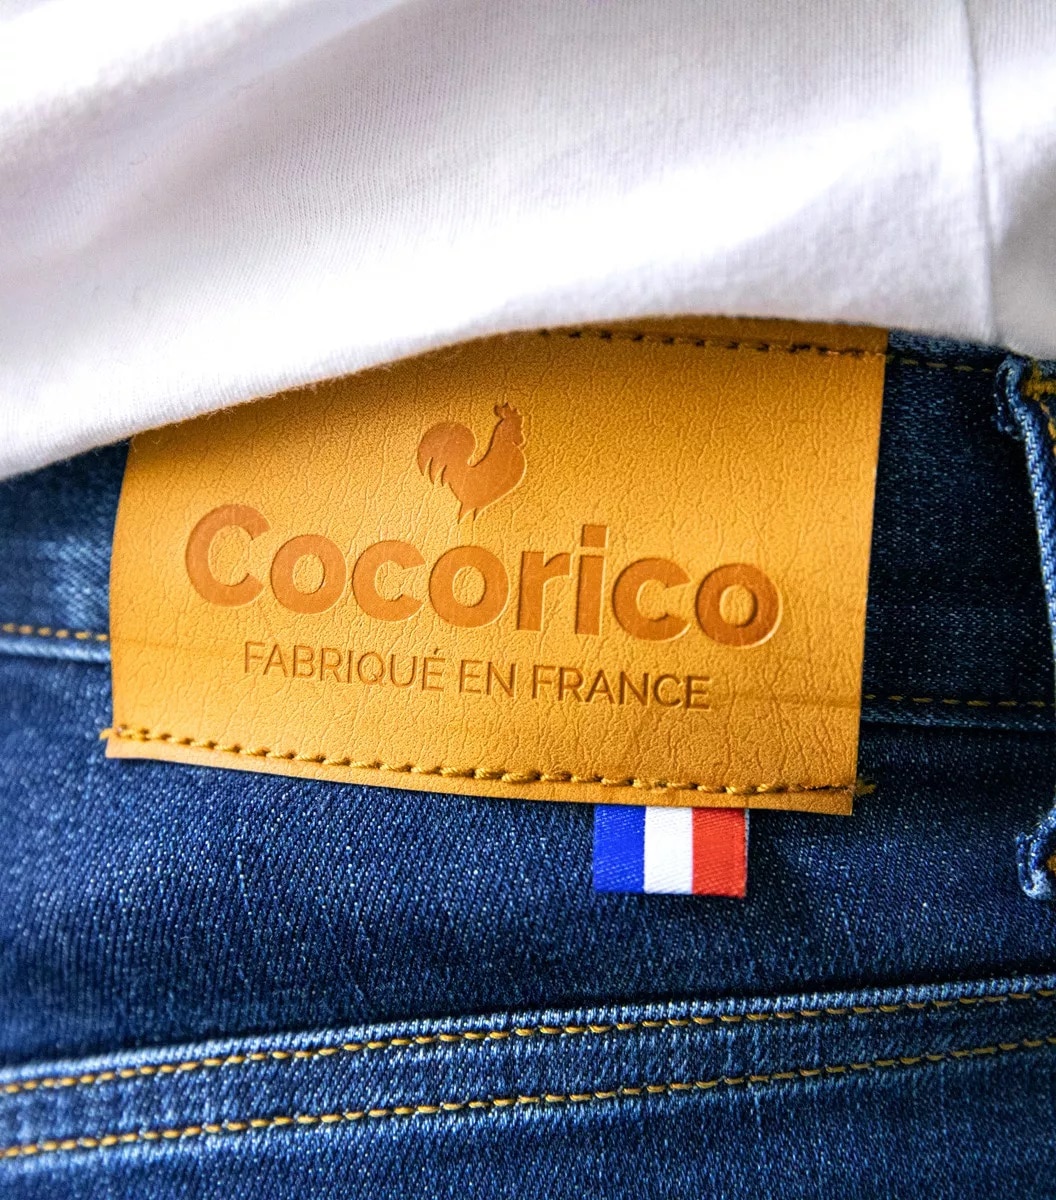 Marques de jeans made in France - Cocorico